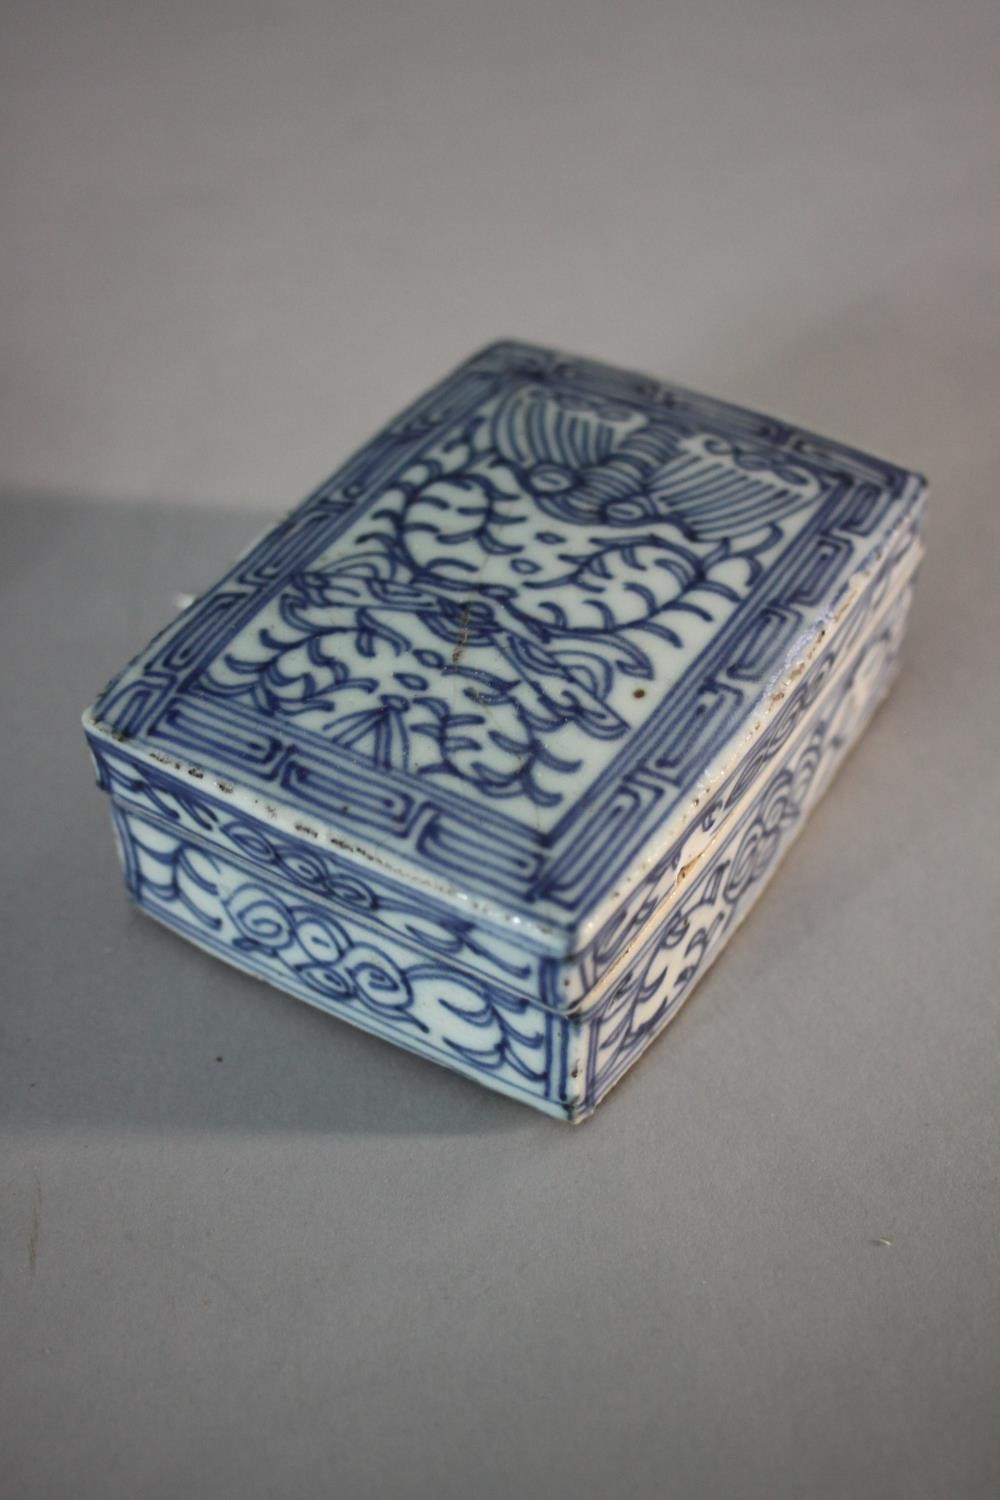 Two early 20th century blue and white Chinese boxes. One circular with stylised floral design and - Image 6 of 9